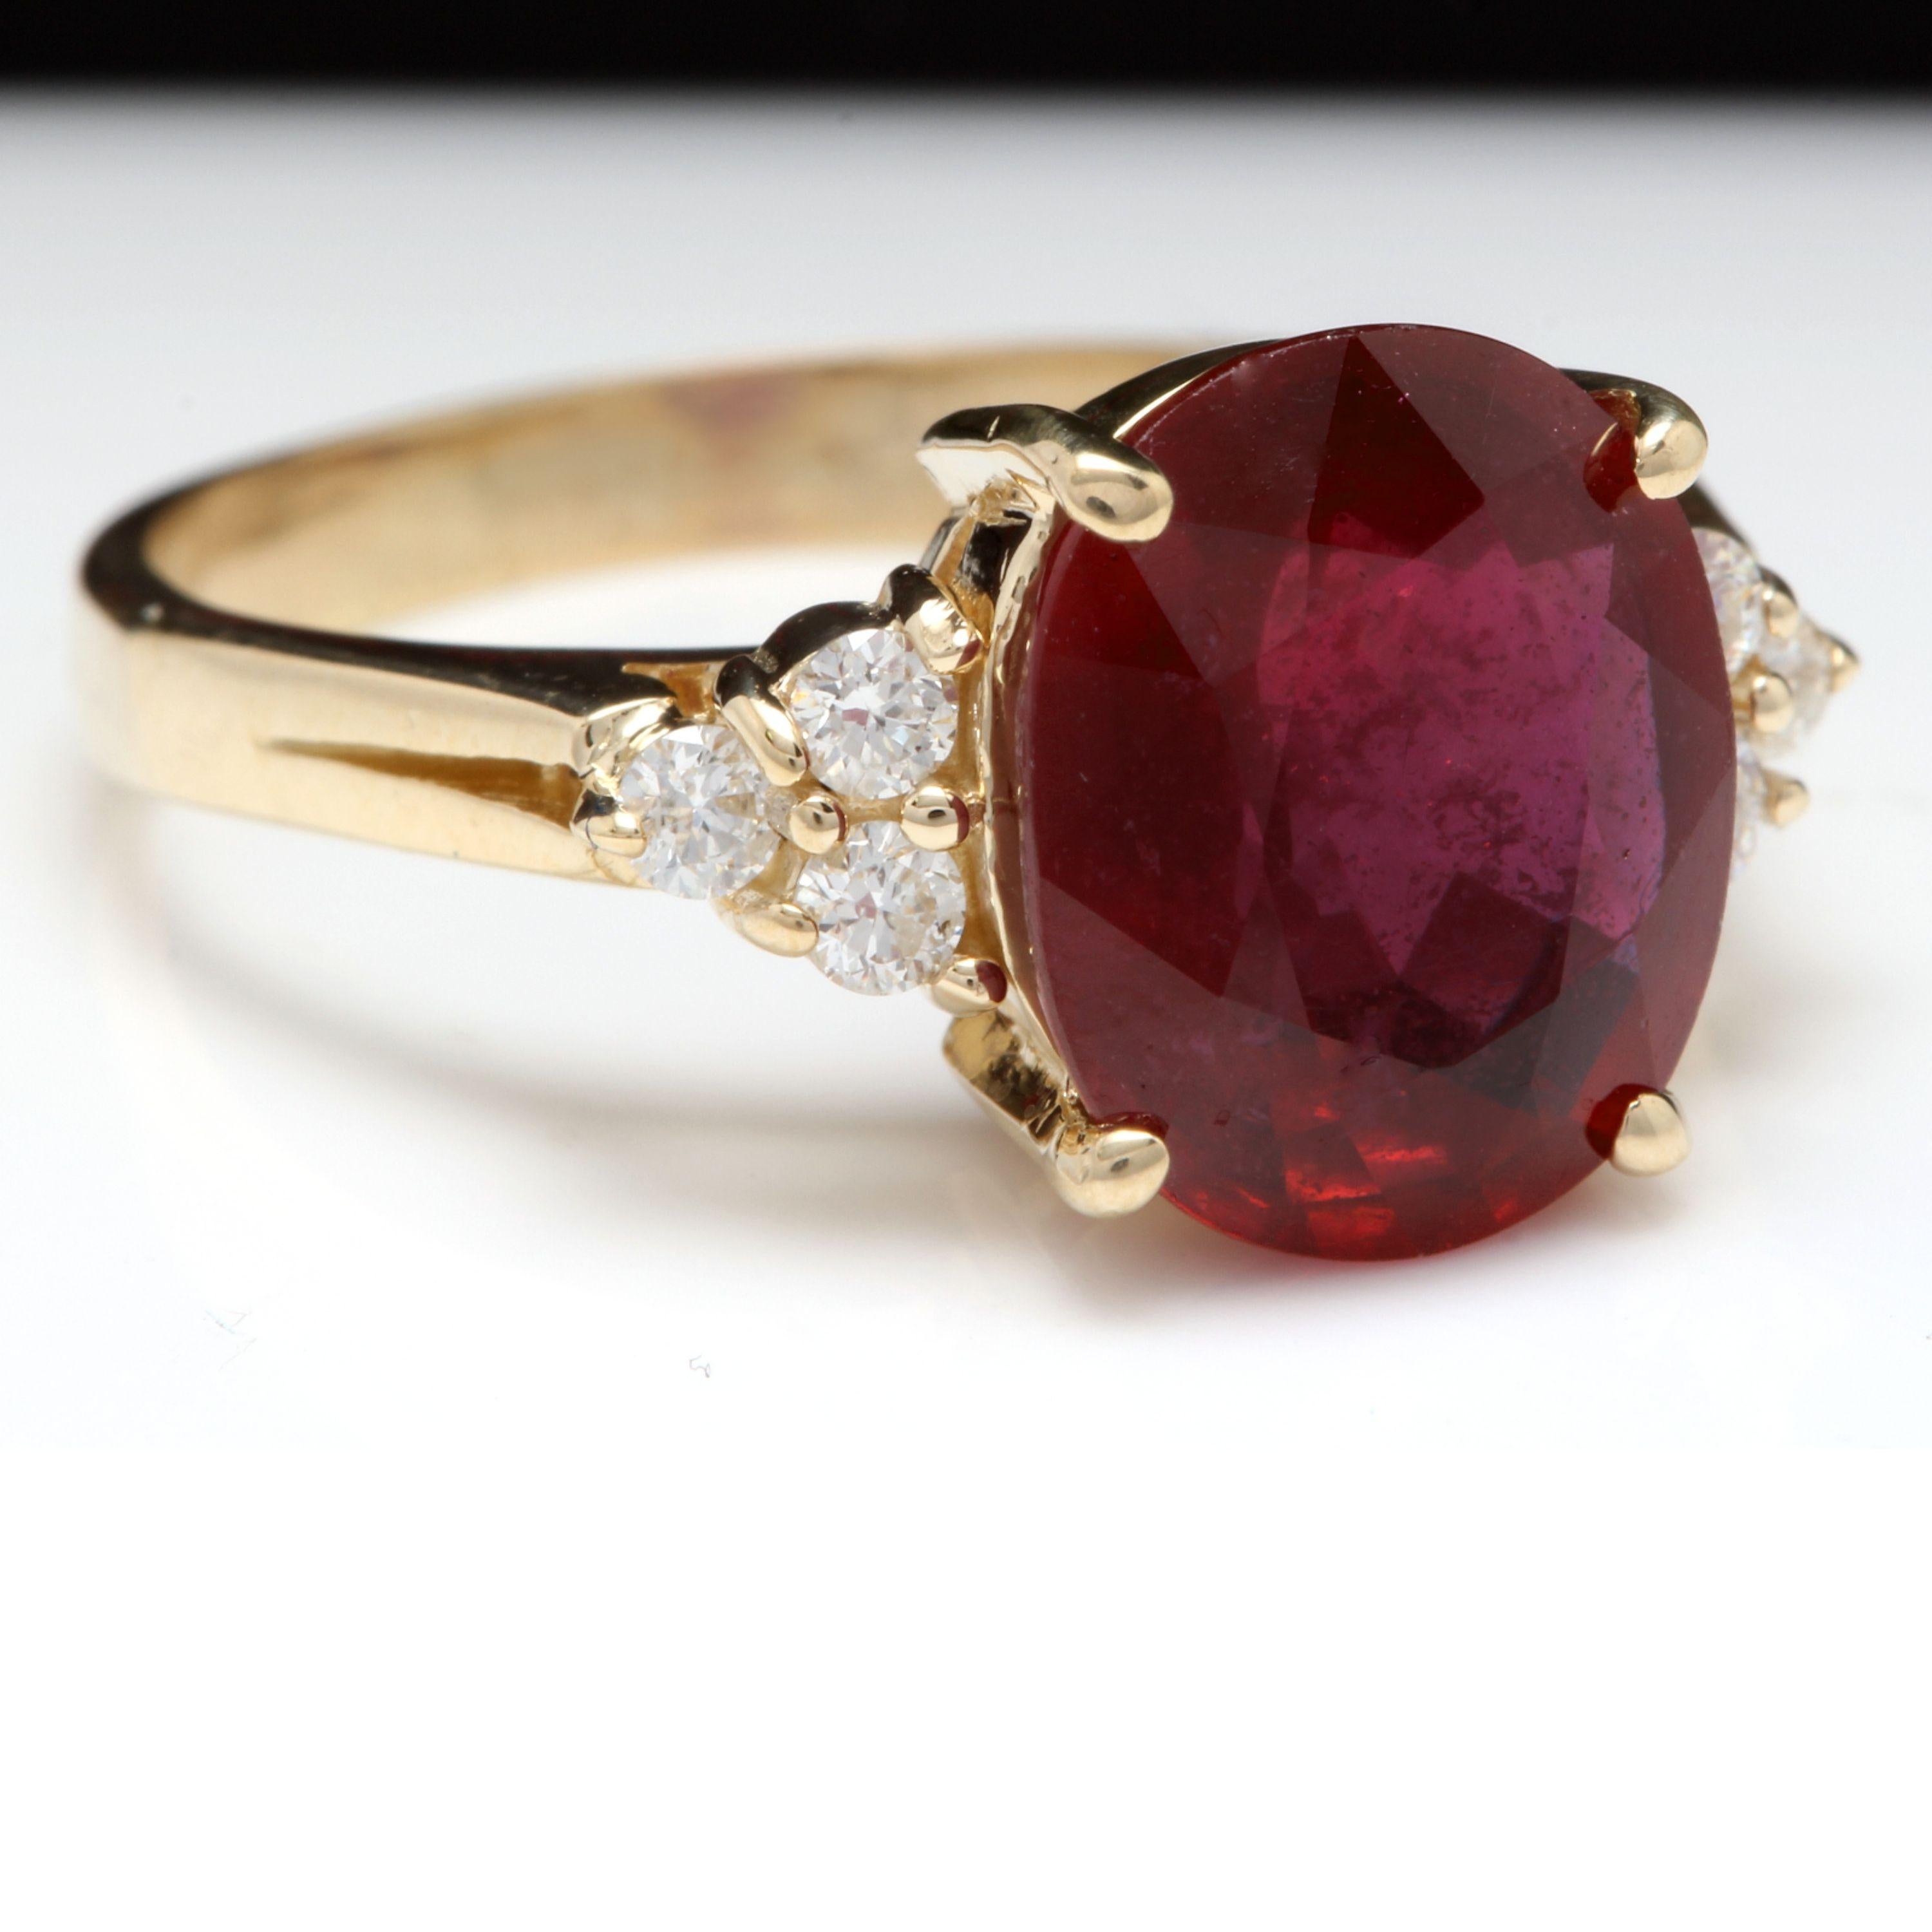 6.50 Carats Impressive Red Ruby and Diamond 14K Yellow Gold Ring

Total Red Ruby Weight is: 6.25 Carats

Ruby Measures: 11x 9mm (Lead Glass Filled)

Natural Round Diamonds Weight: .25 Carats (color G-H / Clarity SI1-SI2)

Ring size: 6 (we offer free